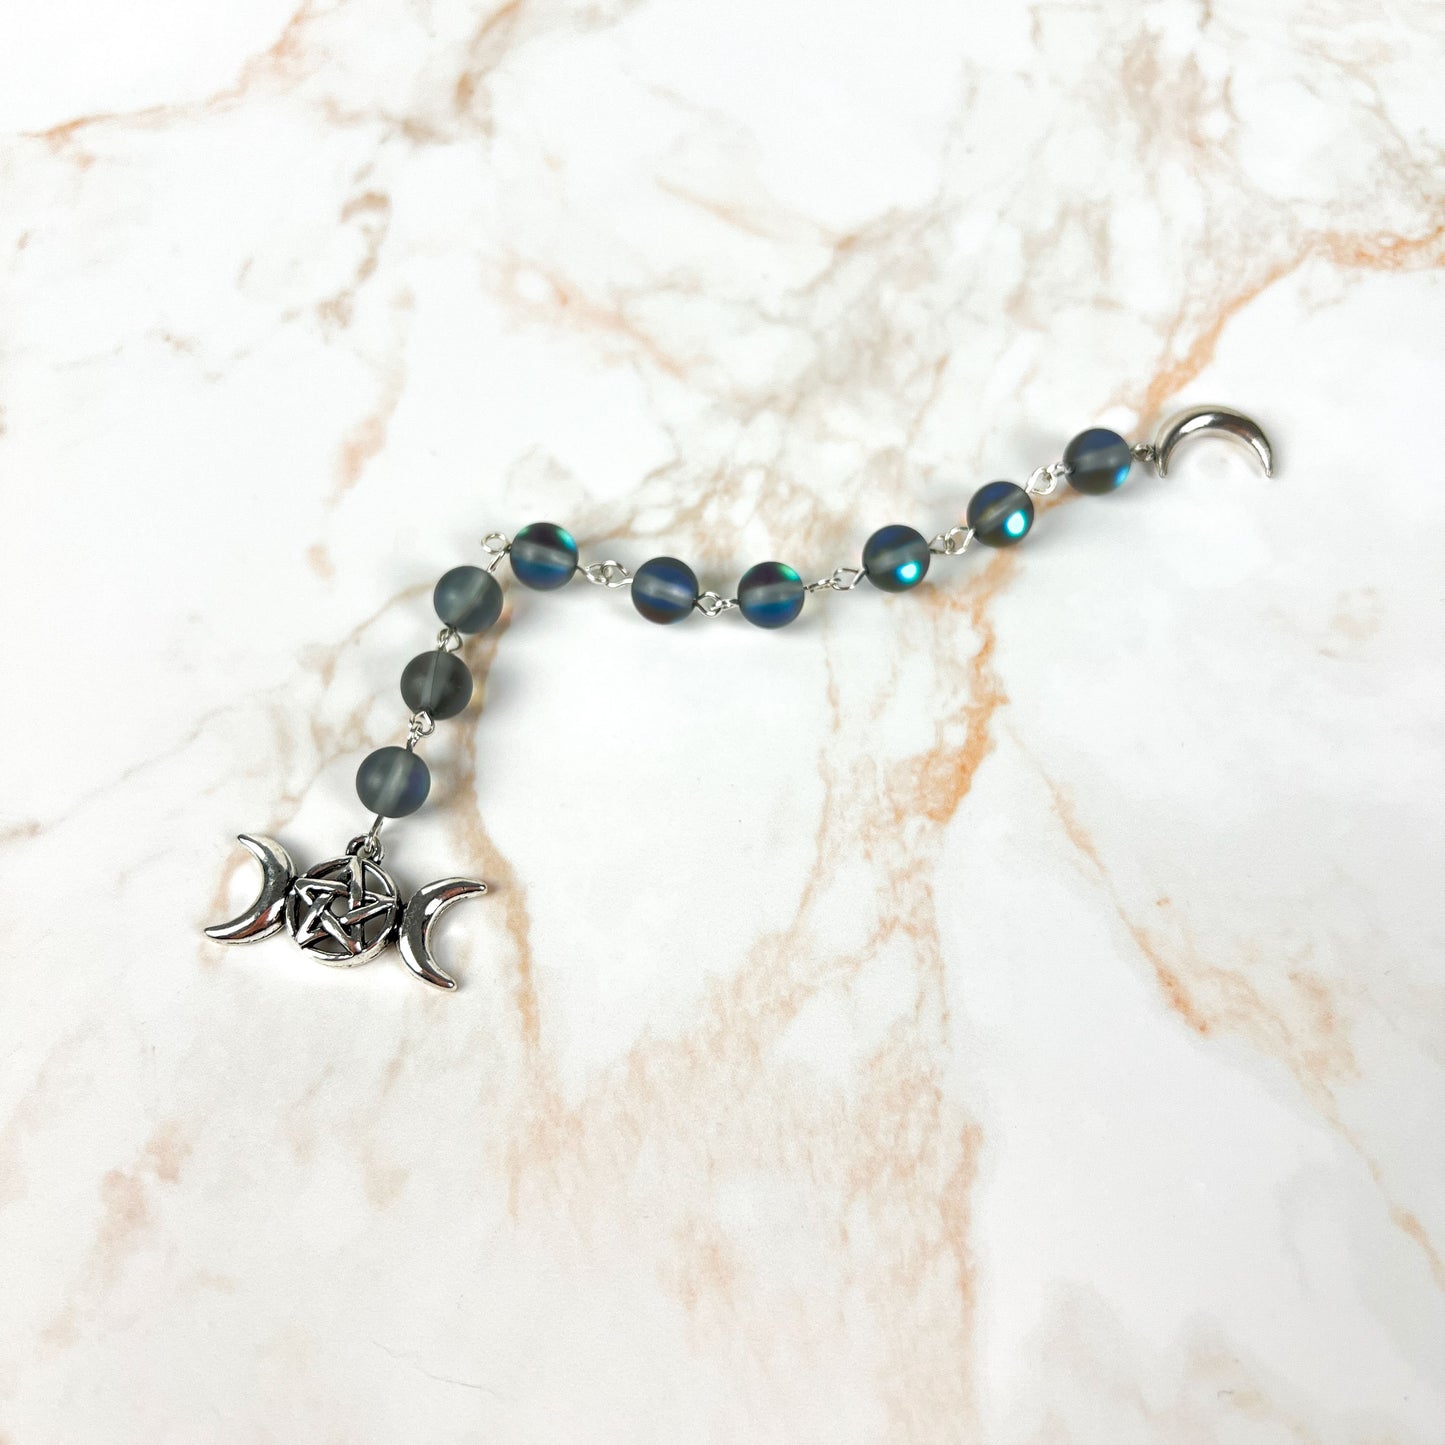 Witch ladder, Mermaid glass or Blue sandstone, Crescent Moon, triple Moon, 9 beads